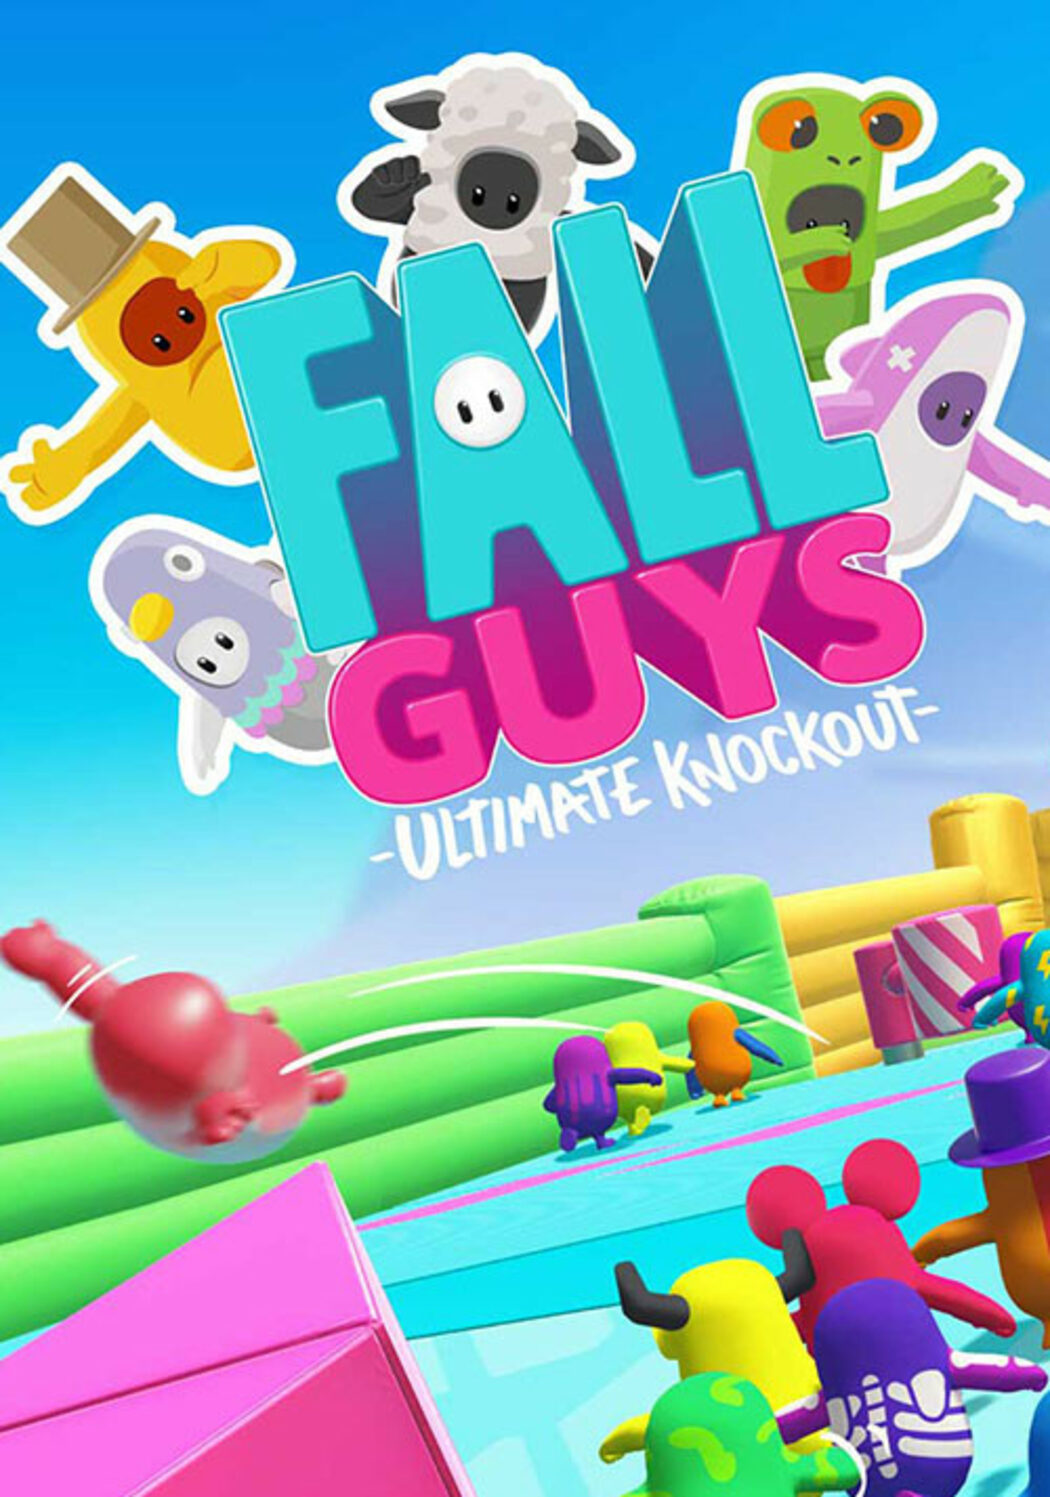 Fall Guys: Ultimate Knockout PC Steam Key GLOBAL FAST DELIVERY! MMO PvP FUN